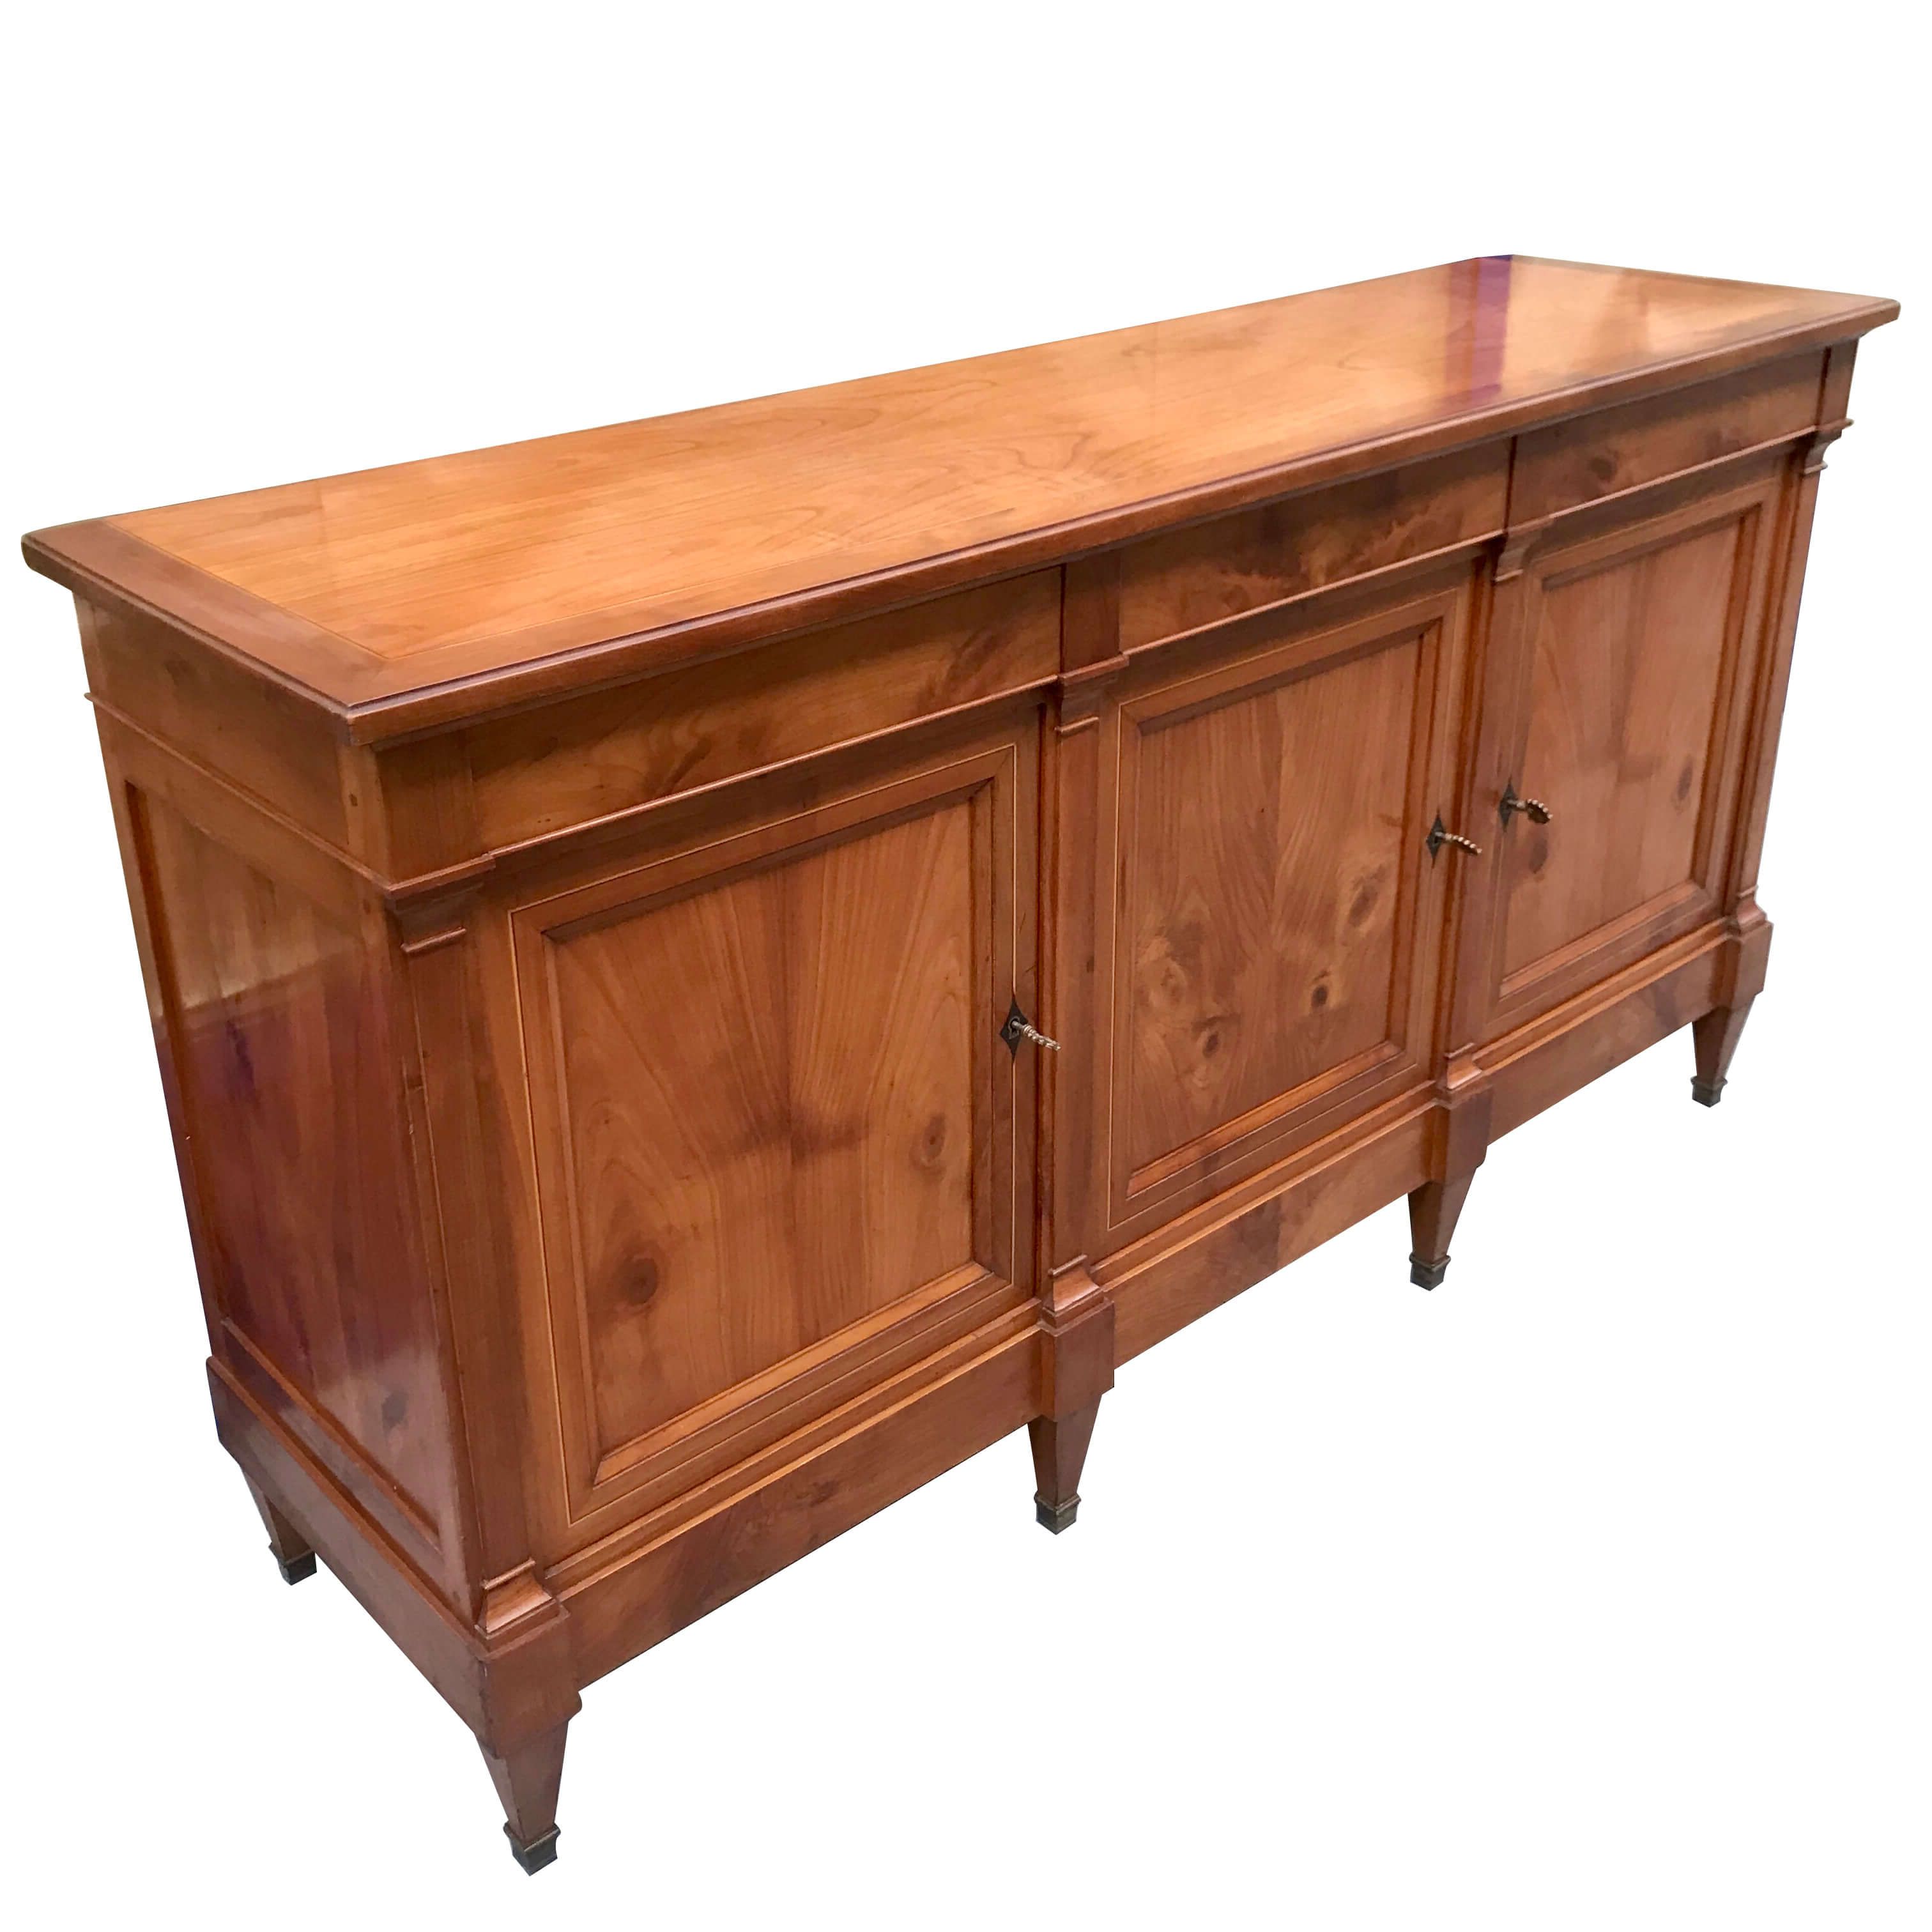 Directoire Style Sideboard With 3 Doors And 3 Drawers In Cherry Wood With  Inlaid Fillets And Bronze Brackets, 19th Century | Intondo Inside Sideboard Storage Cabinet With 3 Drawers &amp; 3 Doors (Gallery 12 of 20)